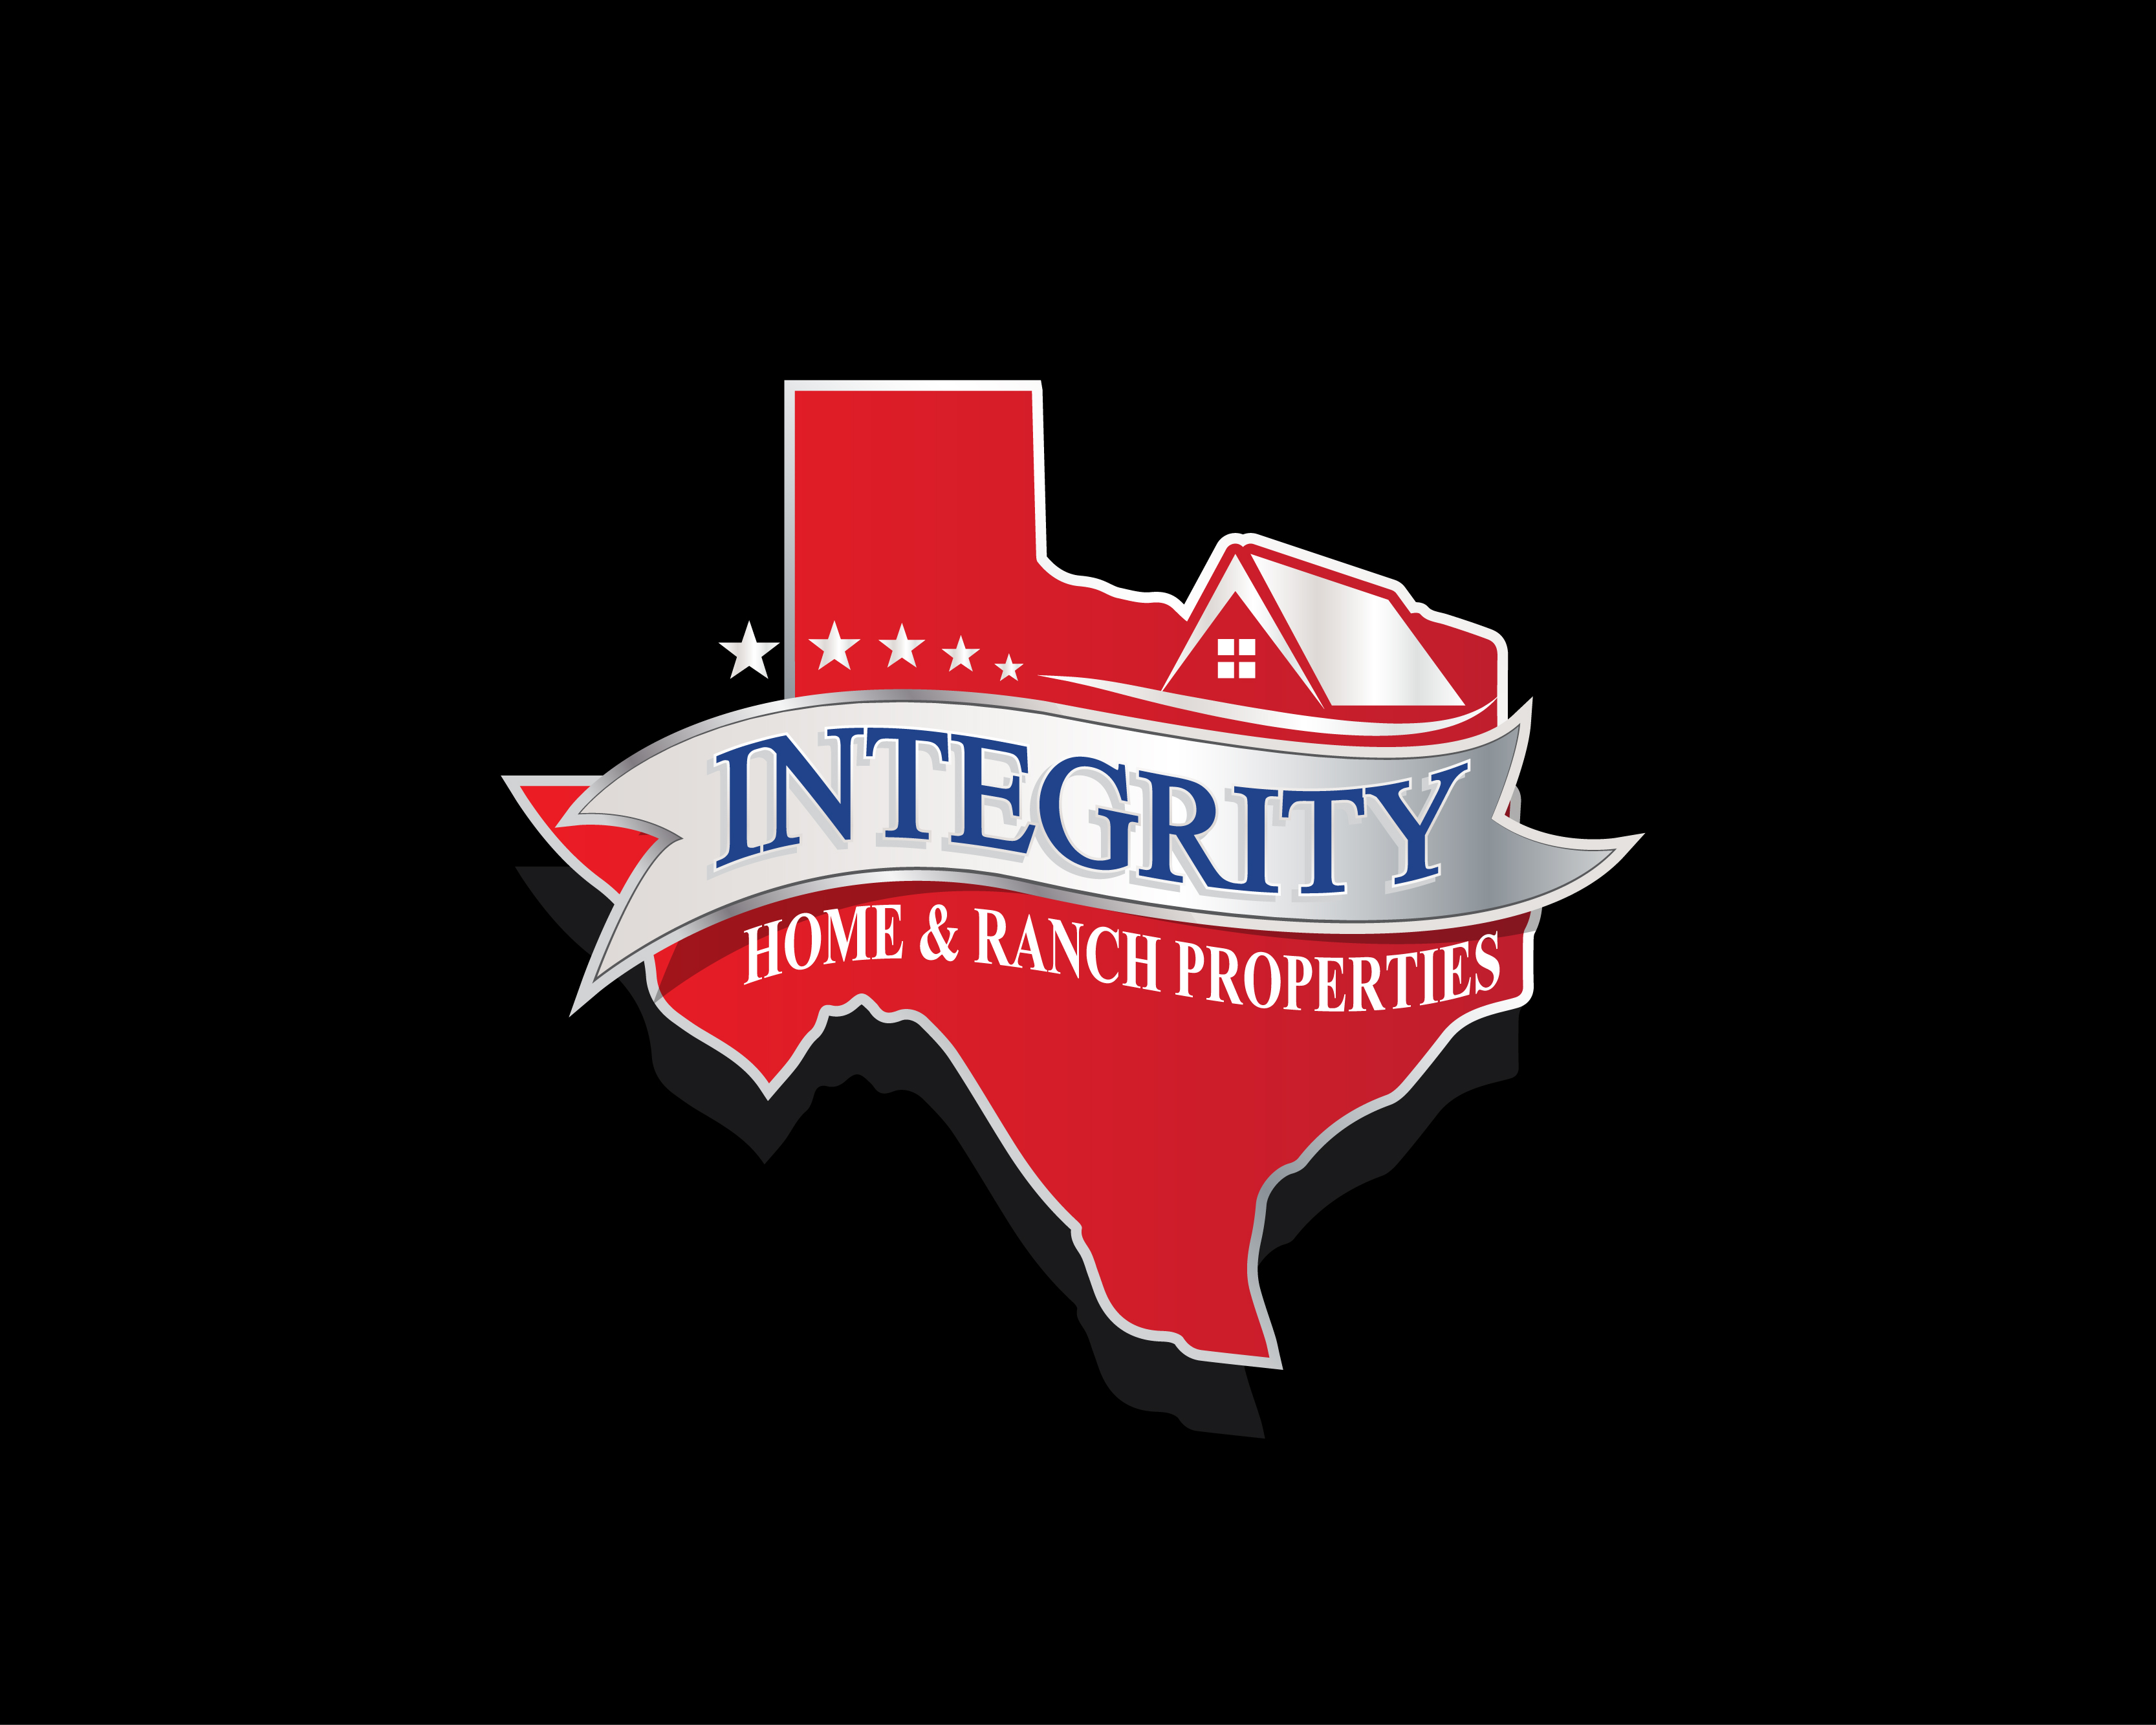 Integrity Home and Ranch Properties logo